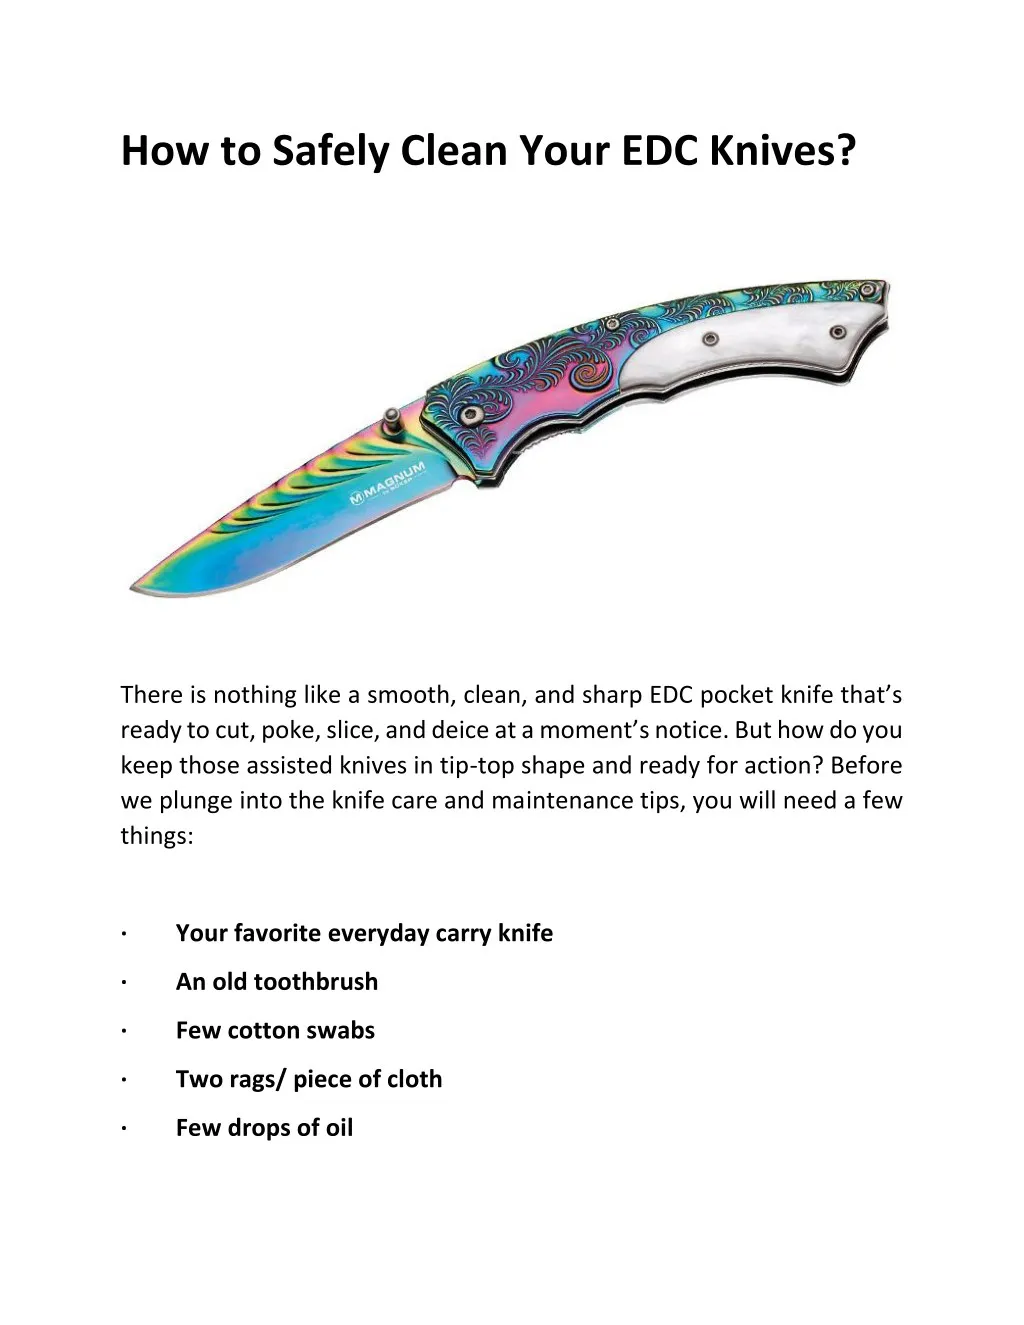 how to safely clean your edc knives